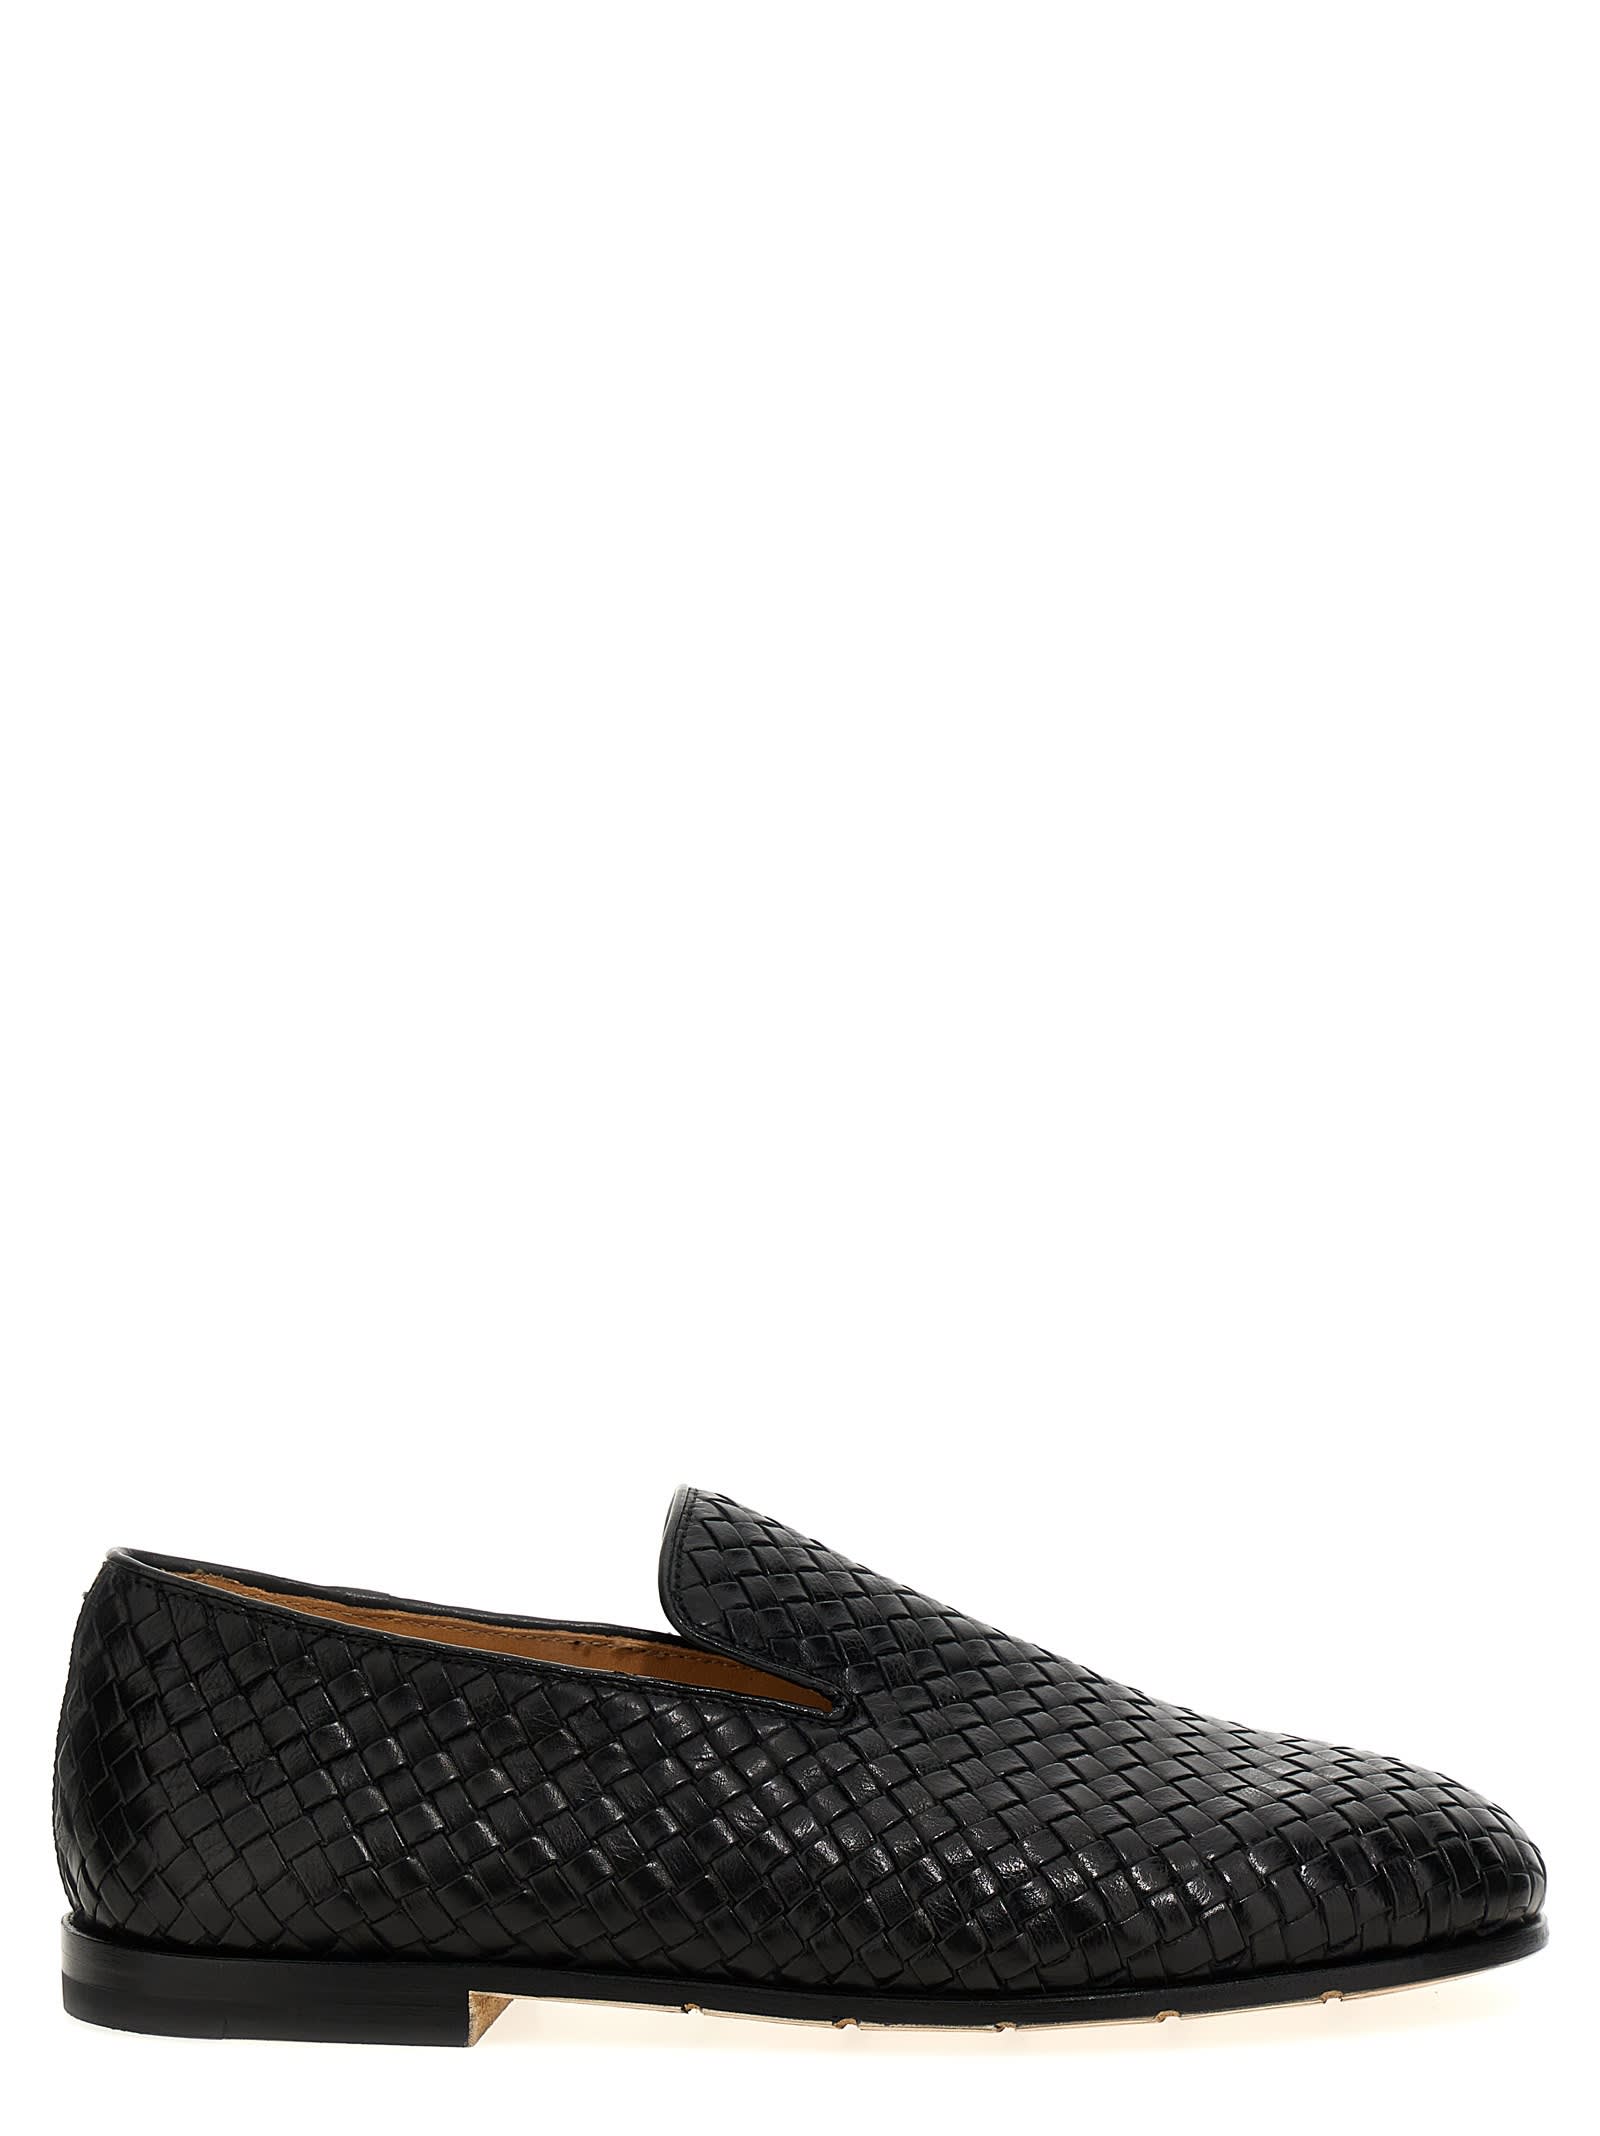 PREMIATA BRAIDED LEATHER LOAFERS